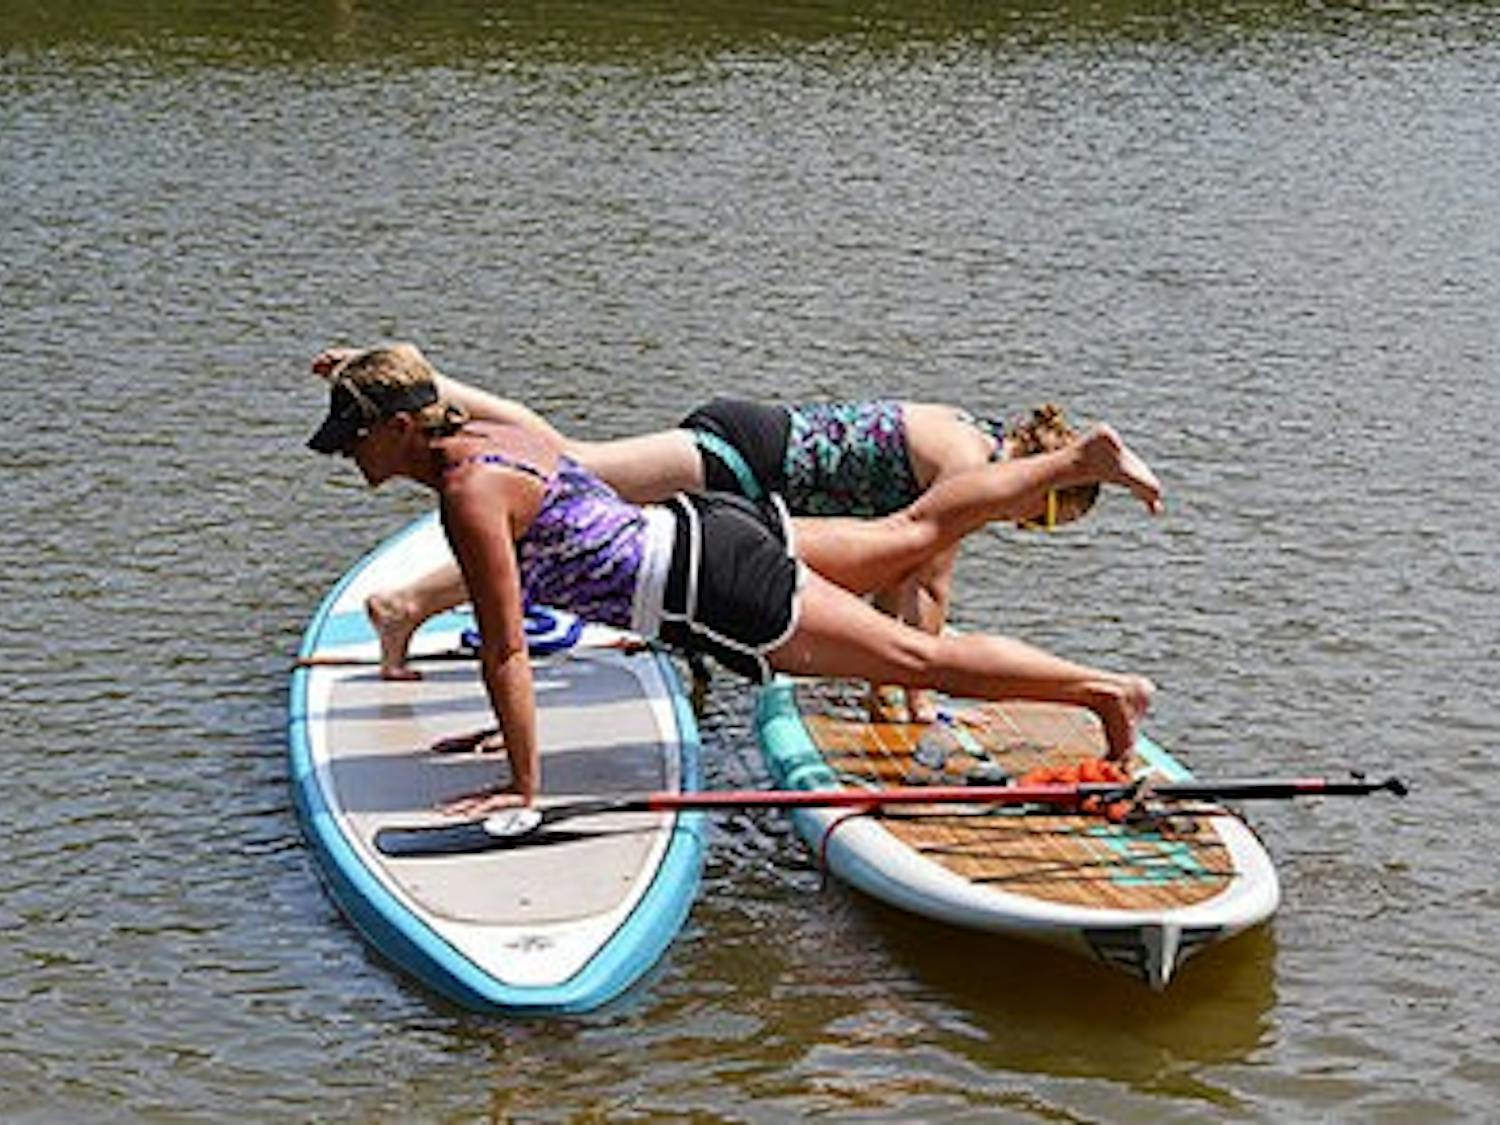 Paddleboarding classes will be from Aug. 25 - Oct. 12.